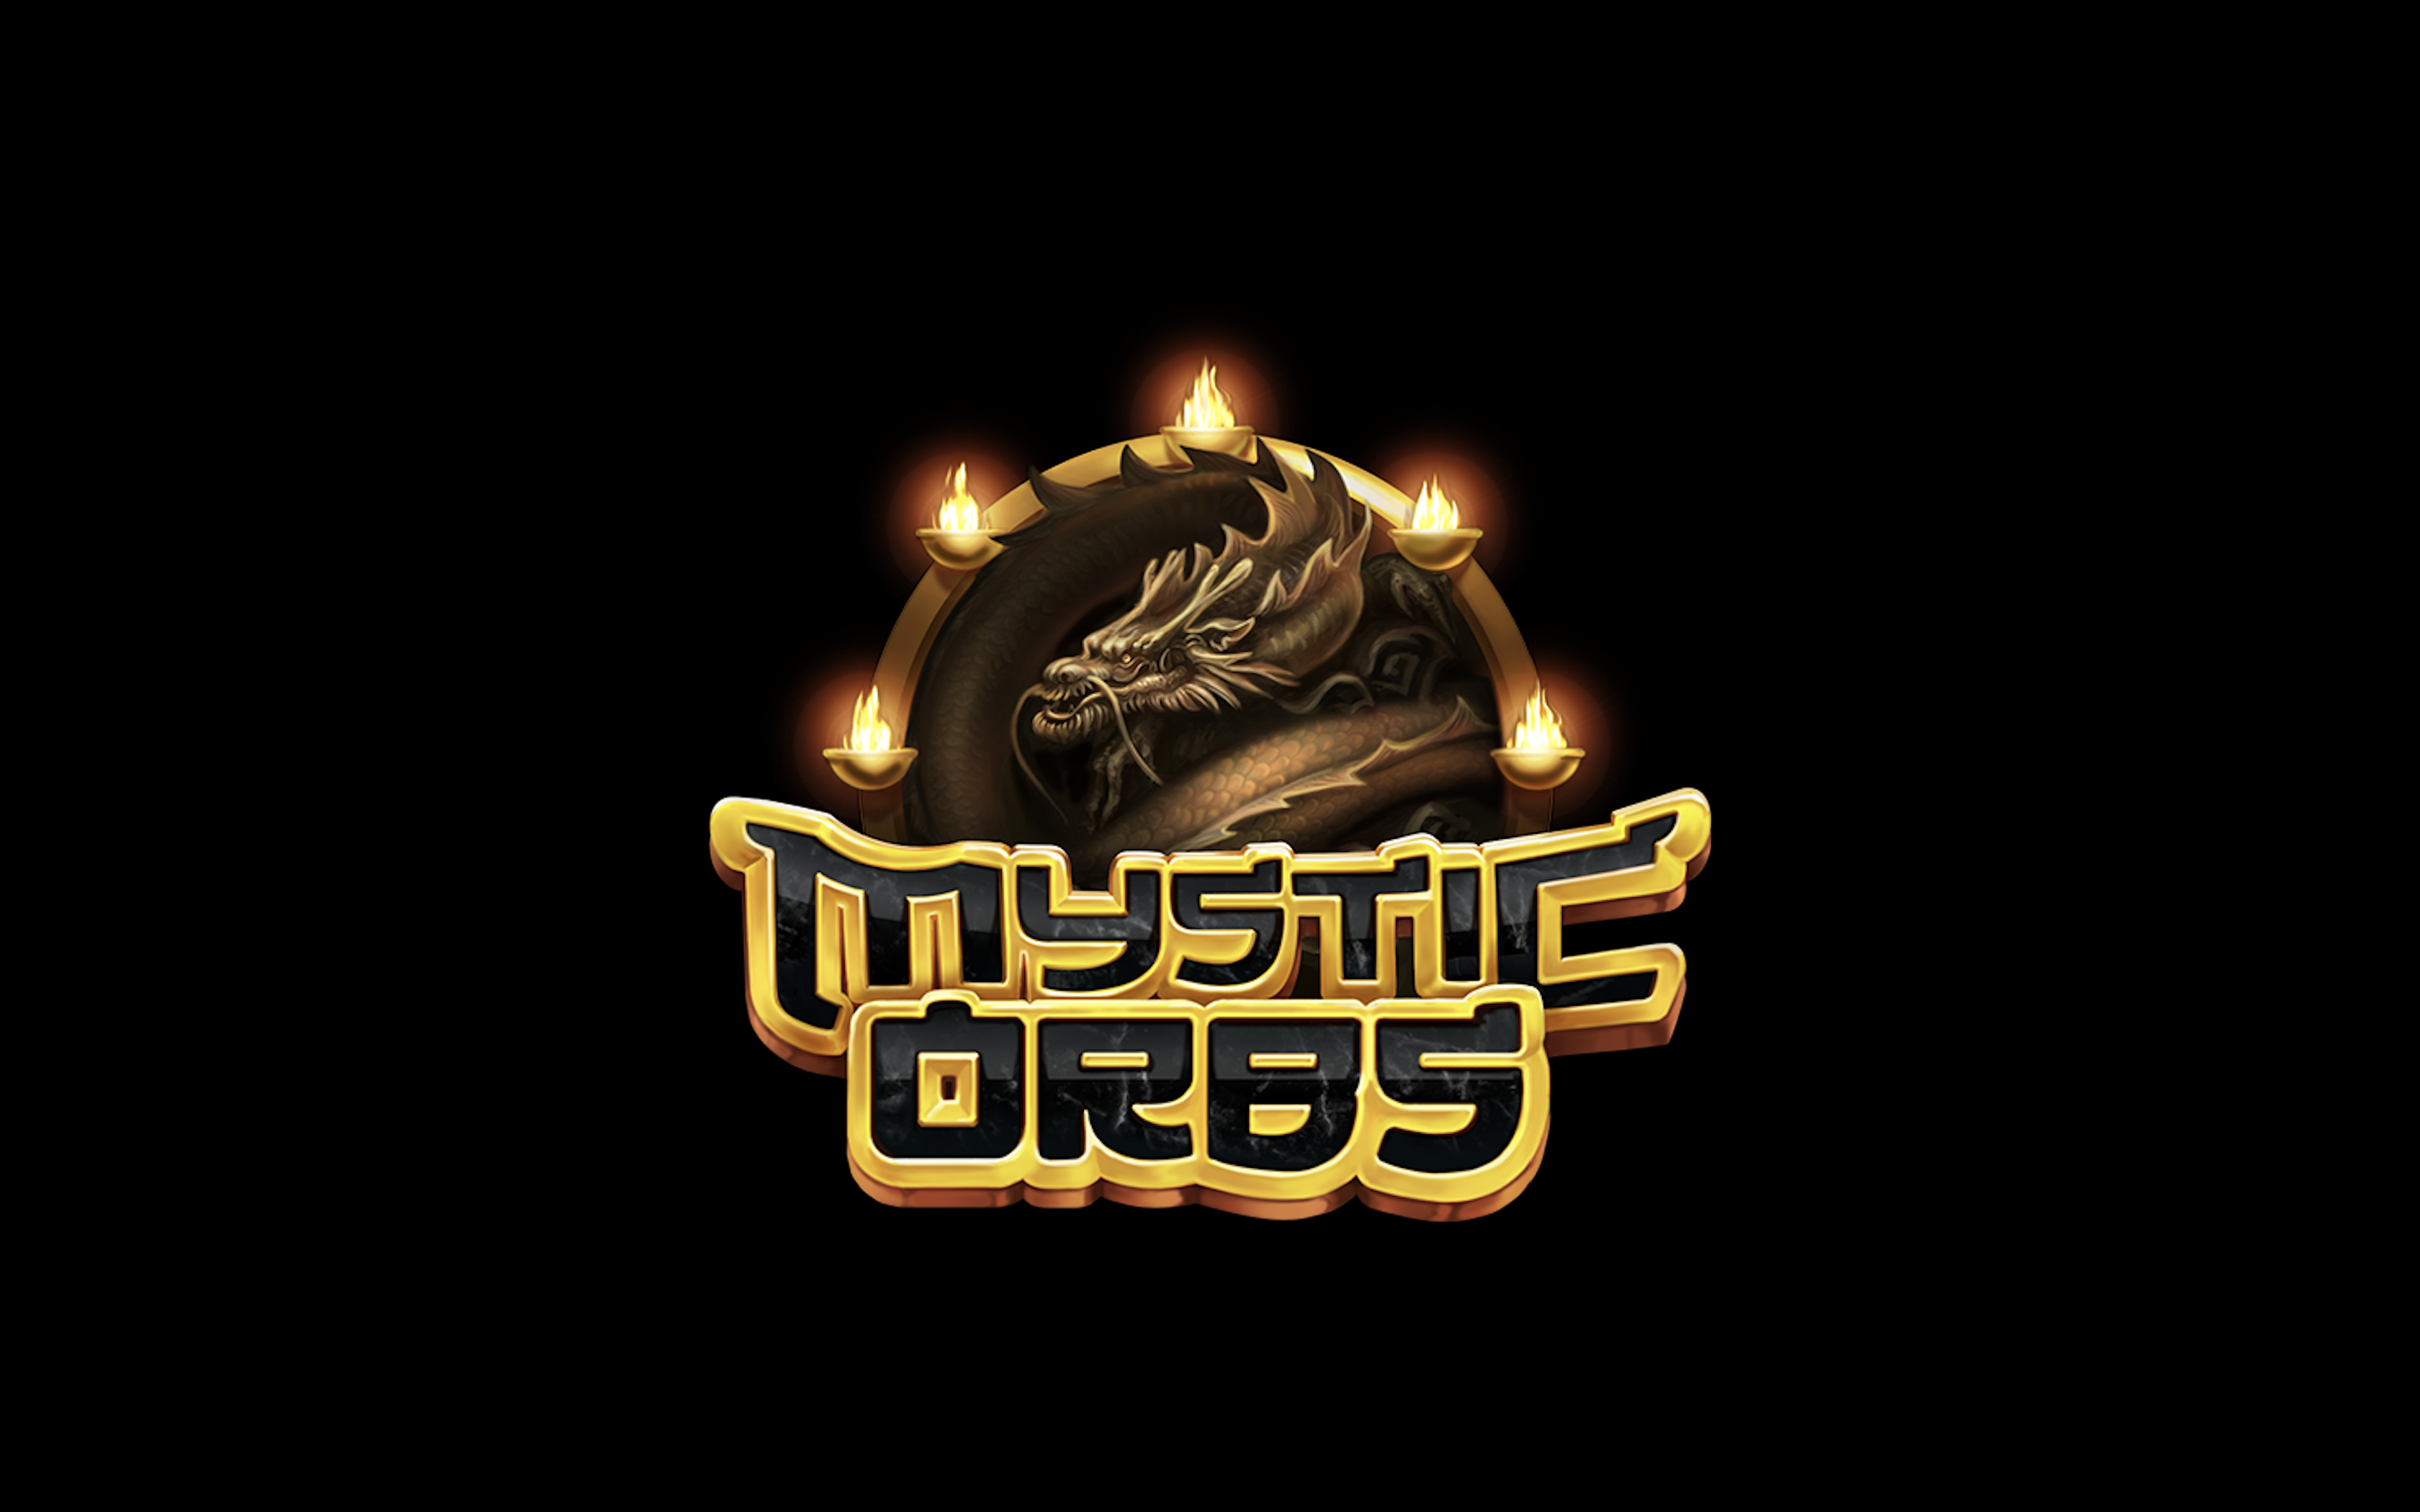 Mystic Orbs is a 5x5, cluster-pays video slot that comes with a maximum win potential of up to x10,000 the bet. 